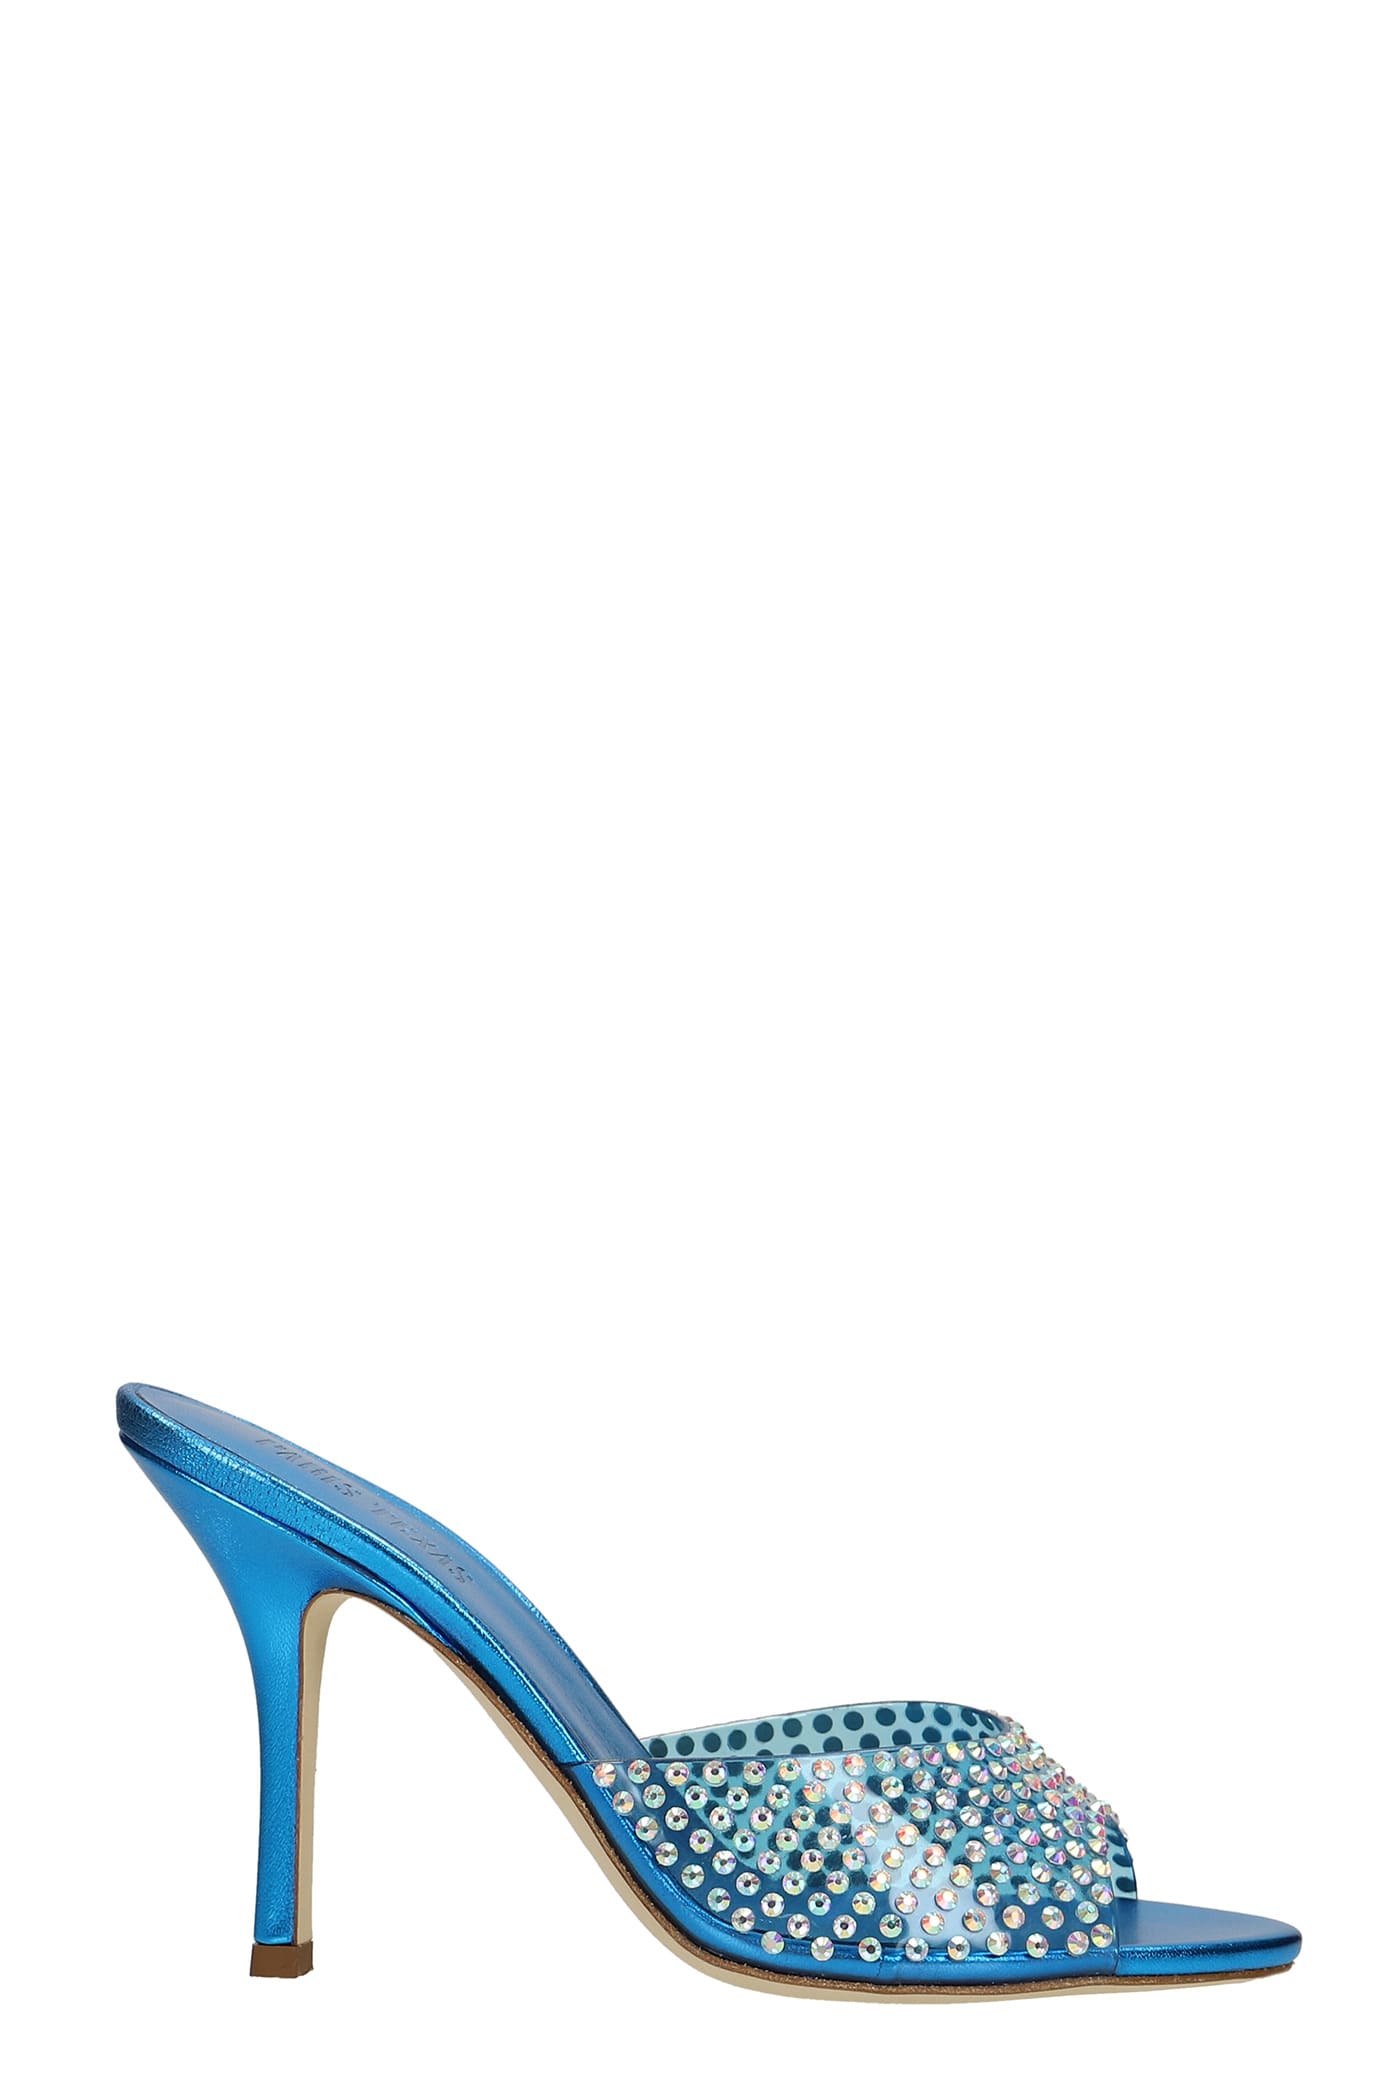 Paris Texas Holly Penelope Sandals In Blue Leather